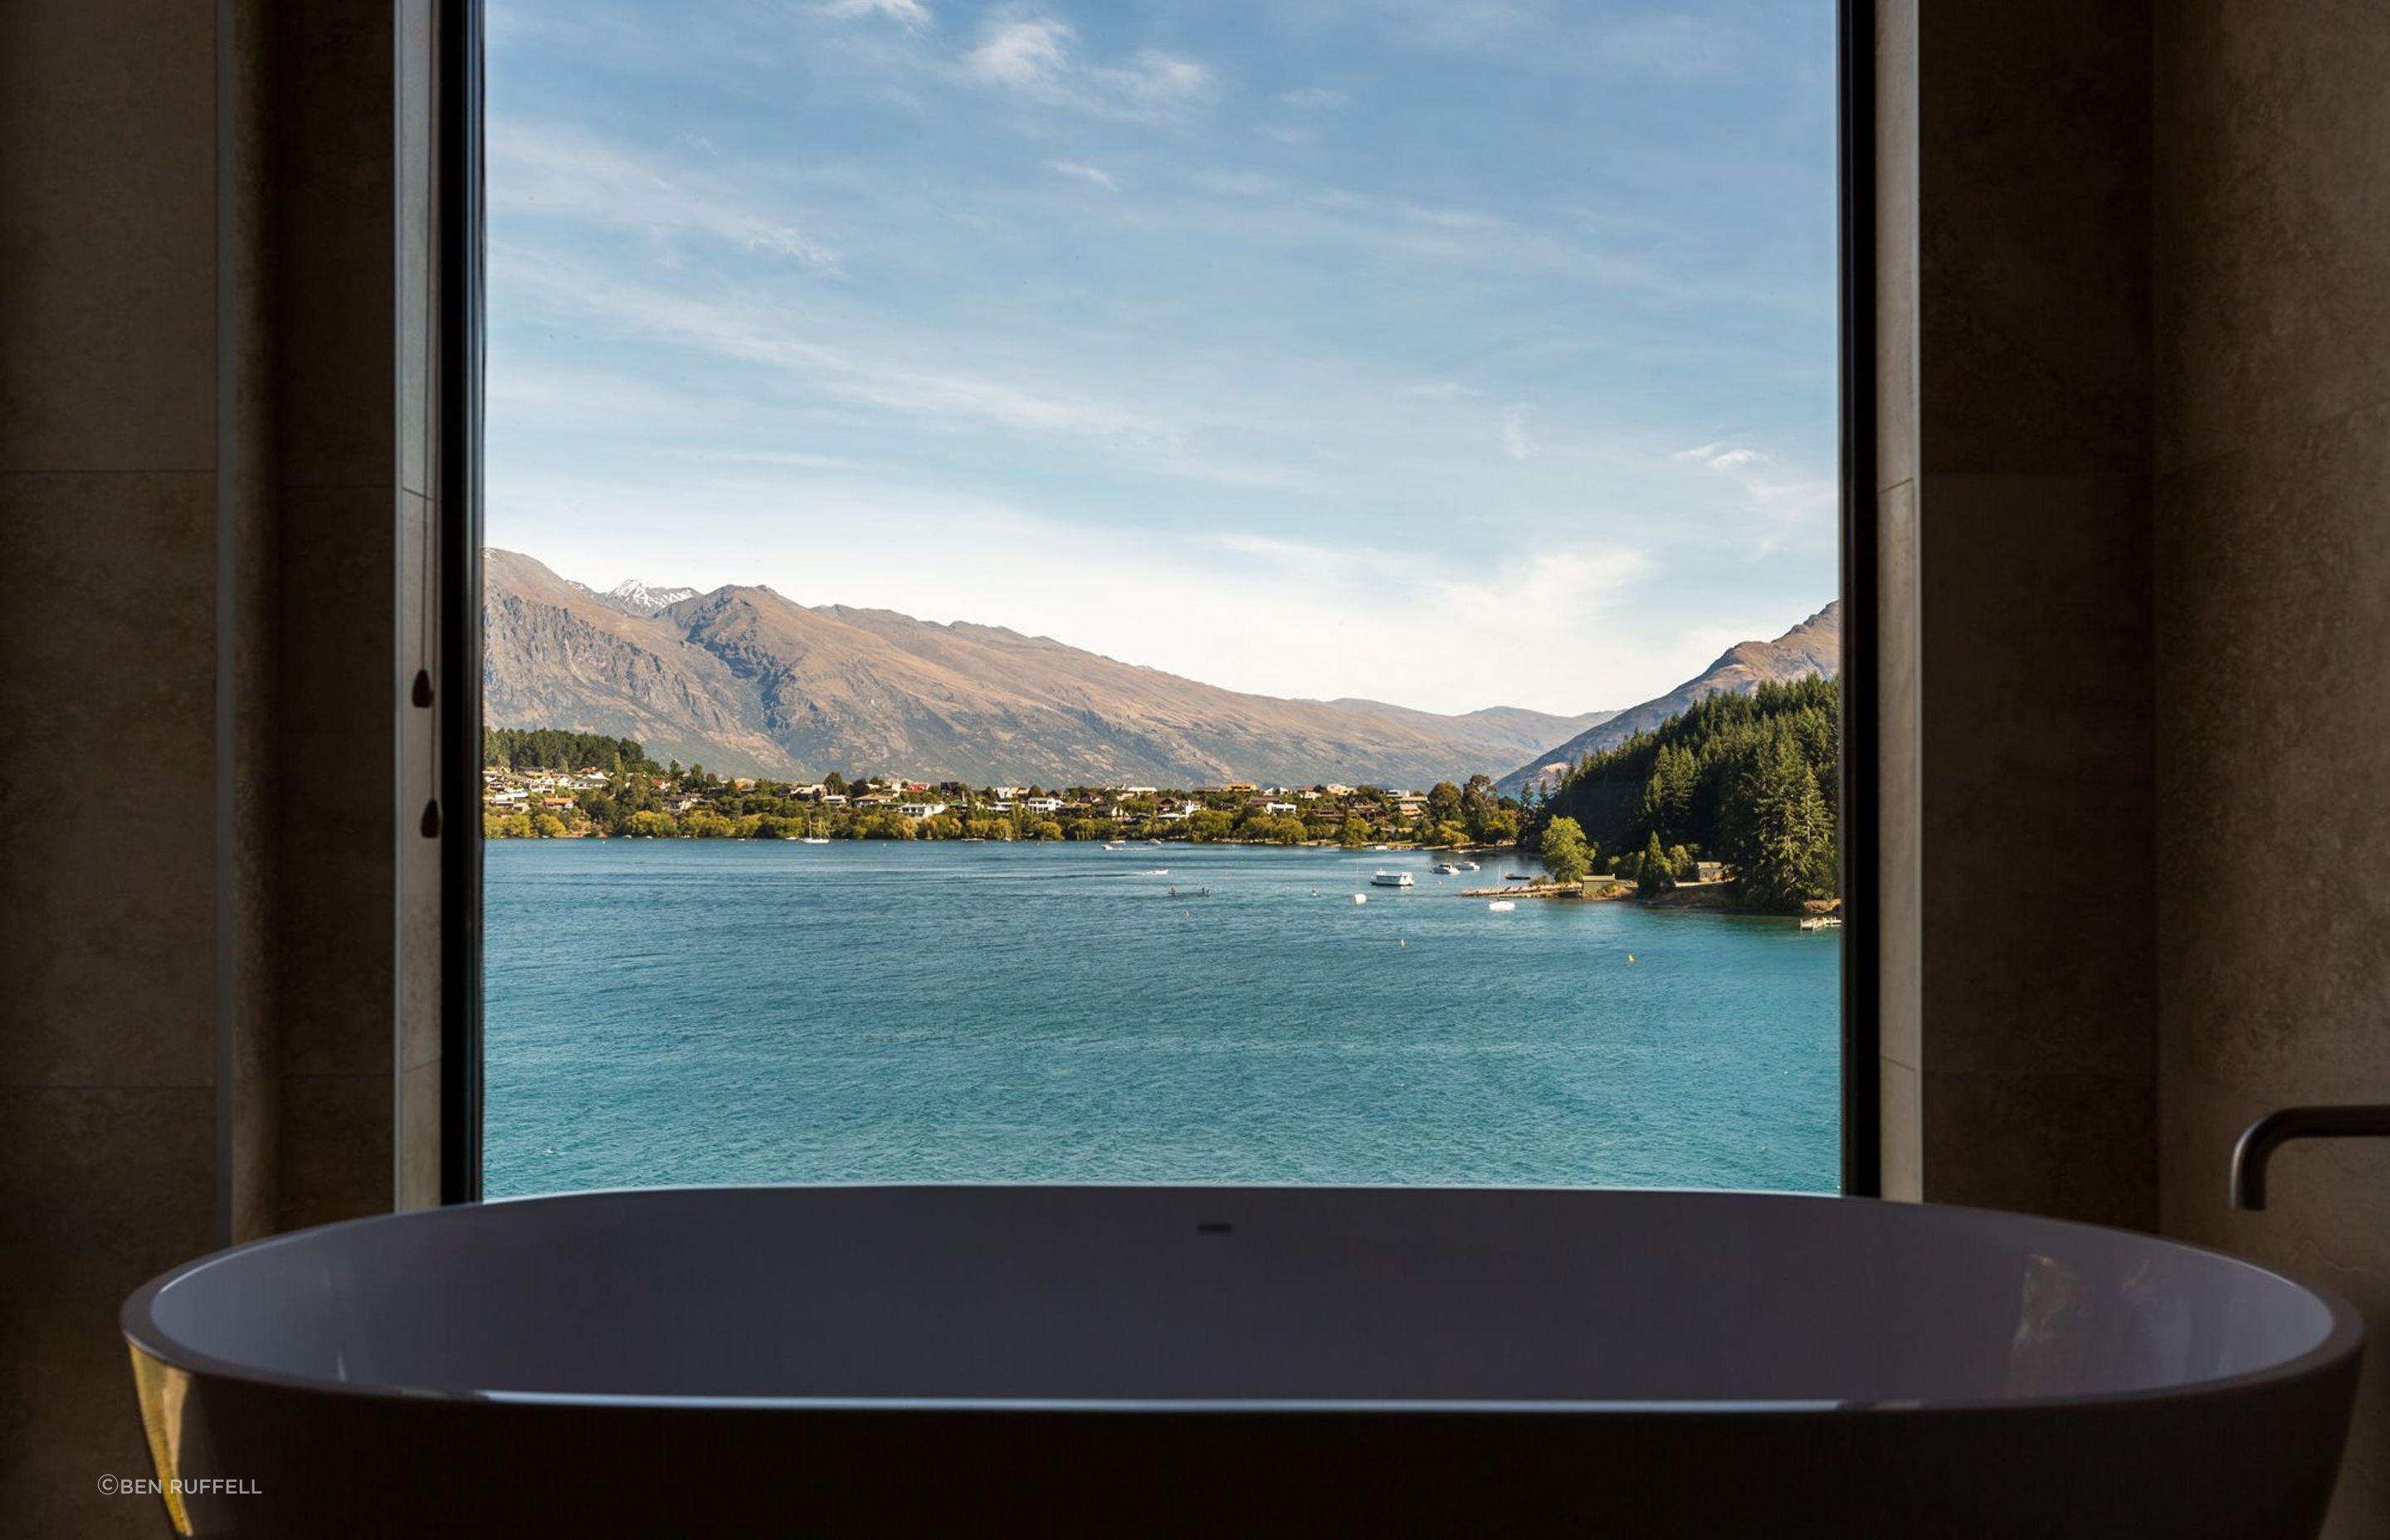 A room with a view: the main ensuite provides stunning views across Lake Wakatipu.